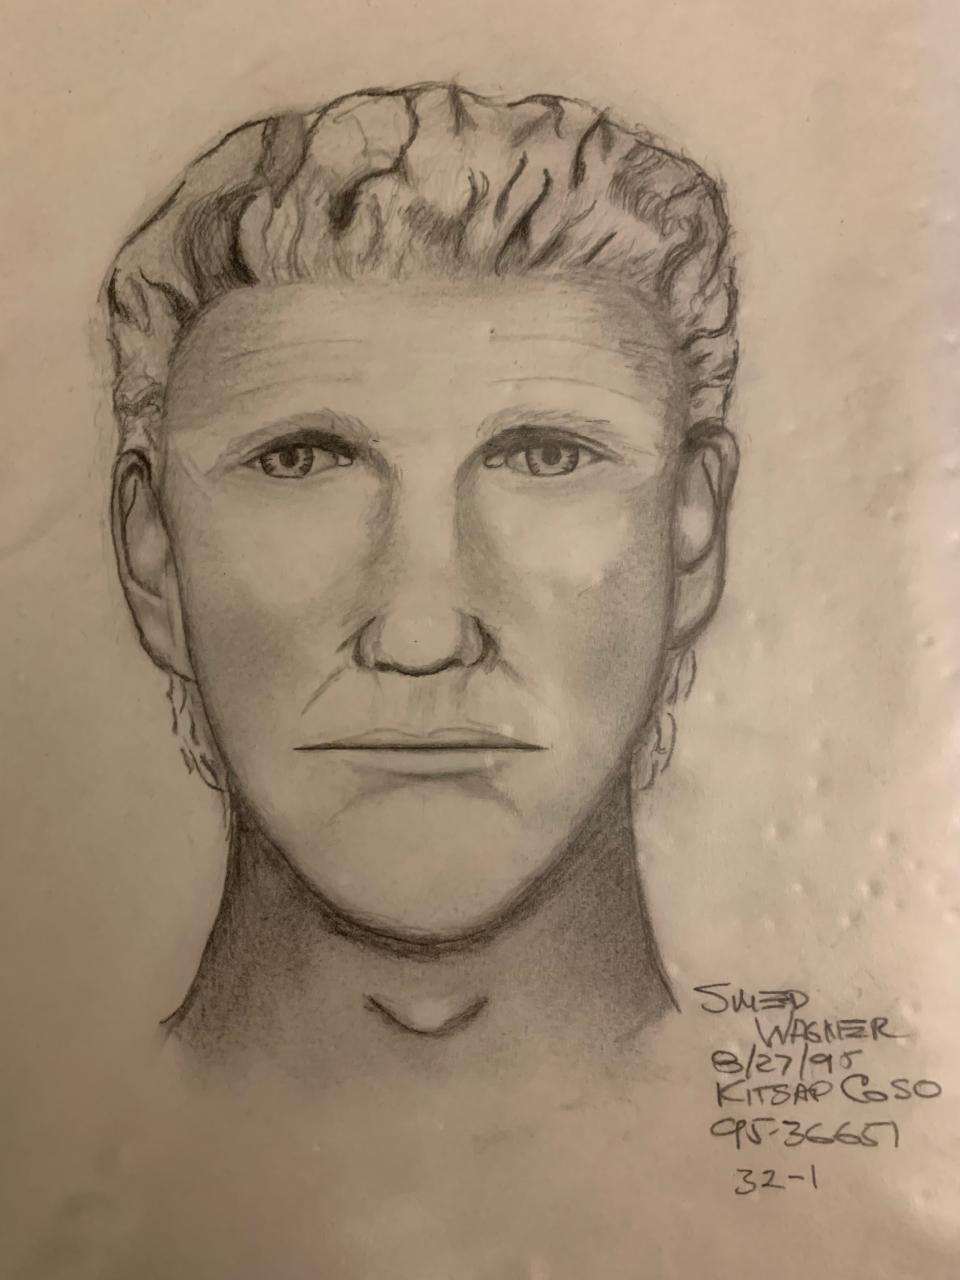 A sketch of the suspect drawn based on a witness's description as the last known person seen to be with Patricia Lorraine Barnes.